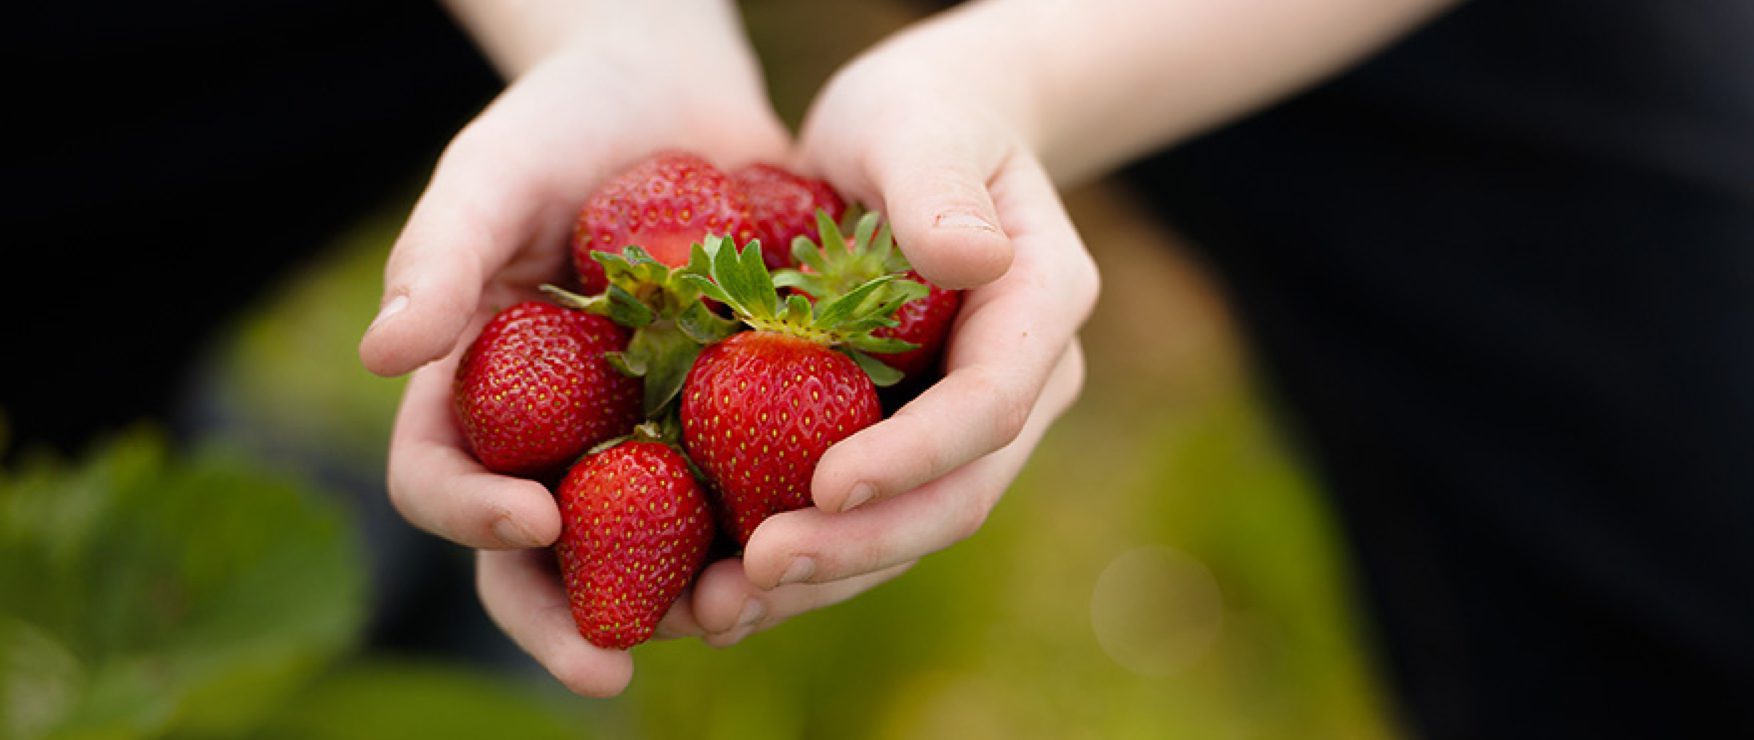 A picture of hands holding strawberries